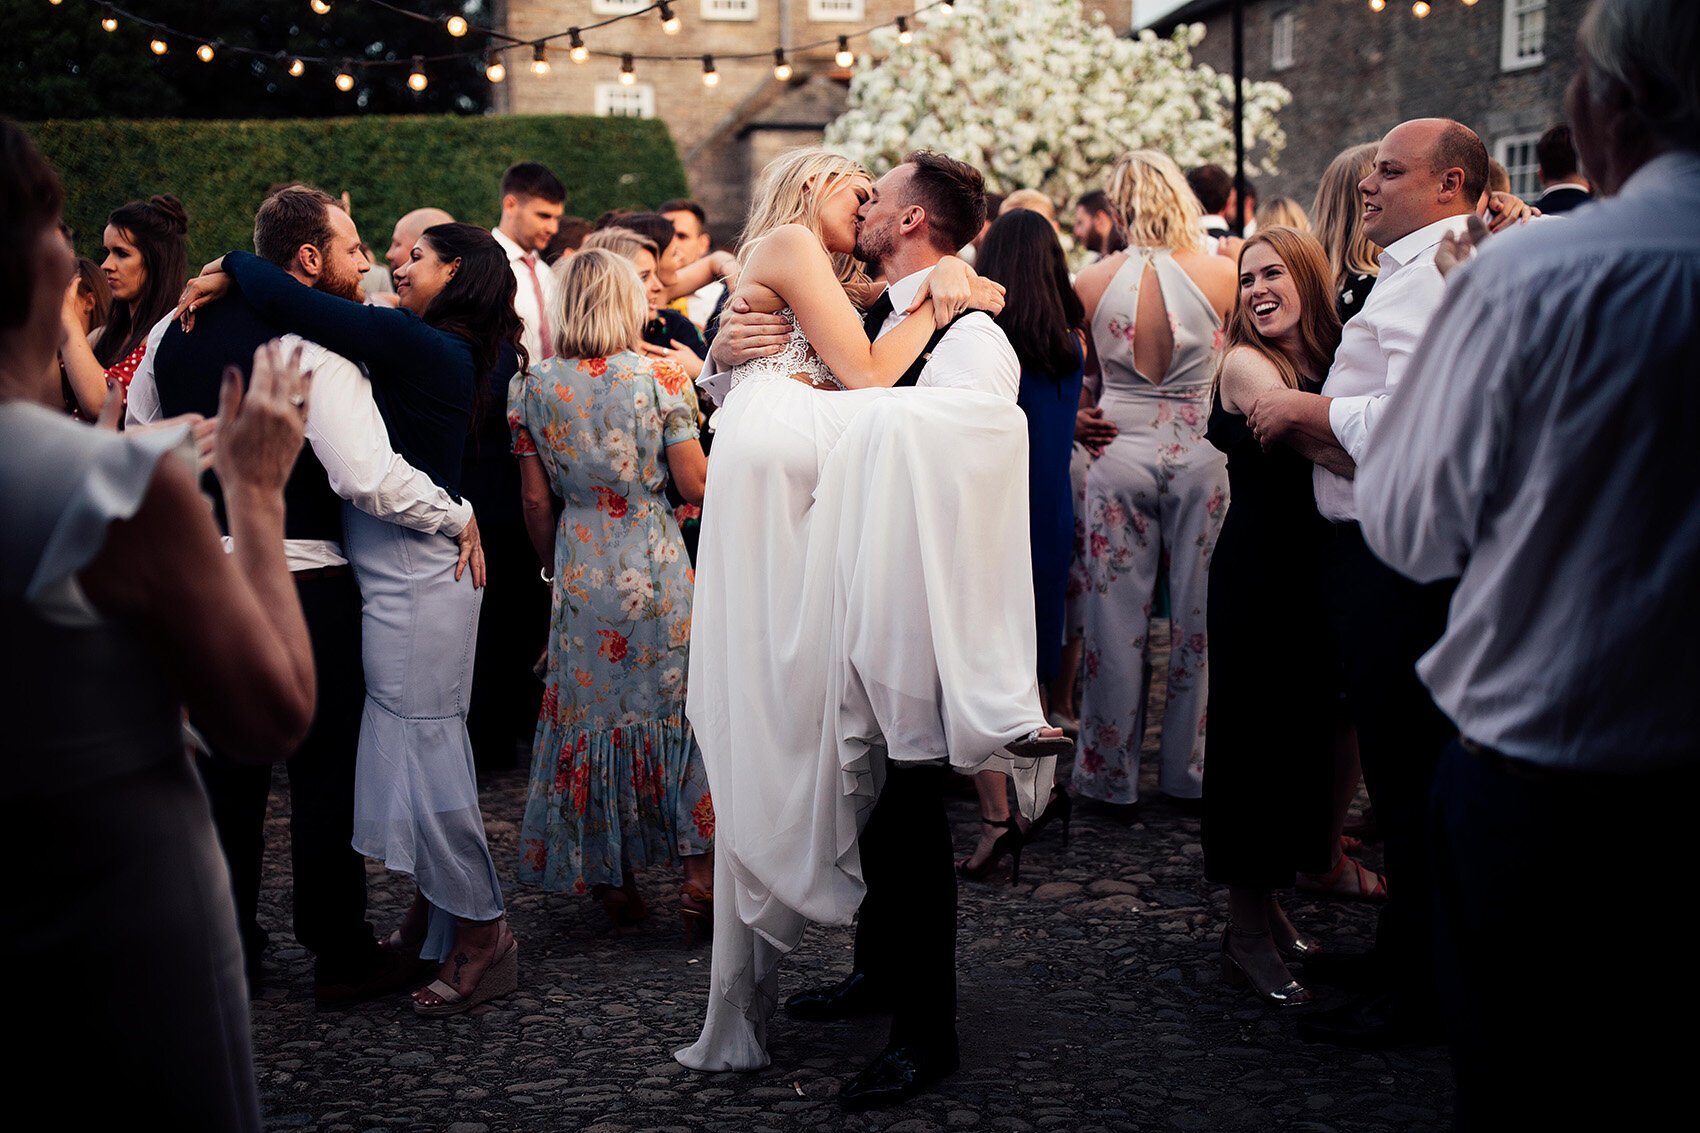 Groom picking up his bride during outdoor wedding first dance